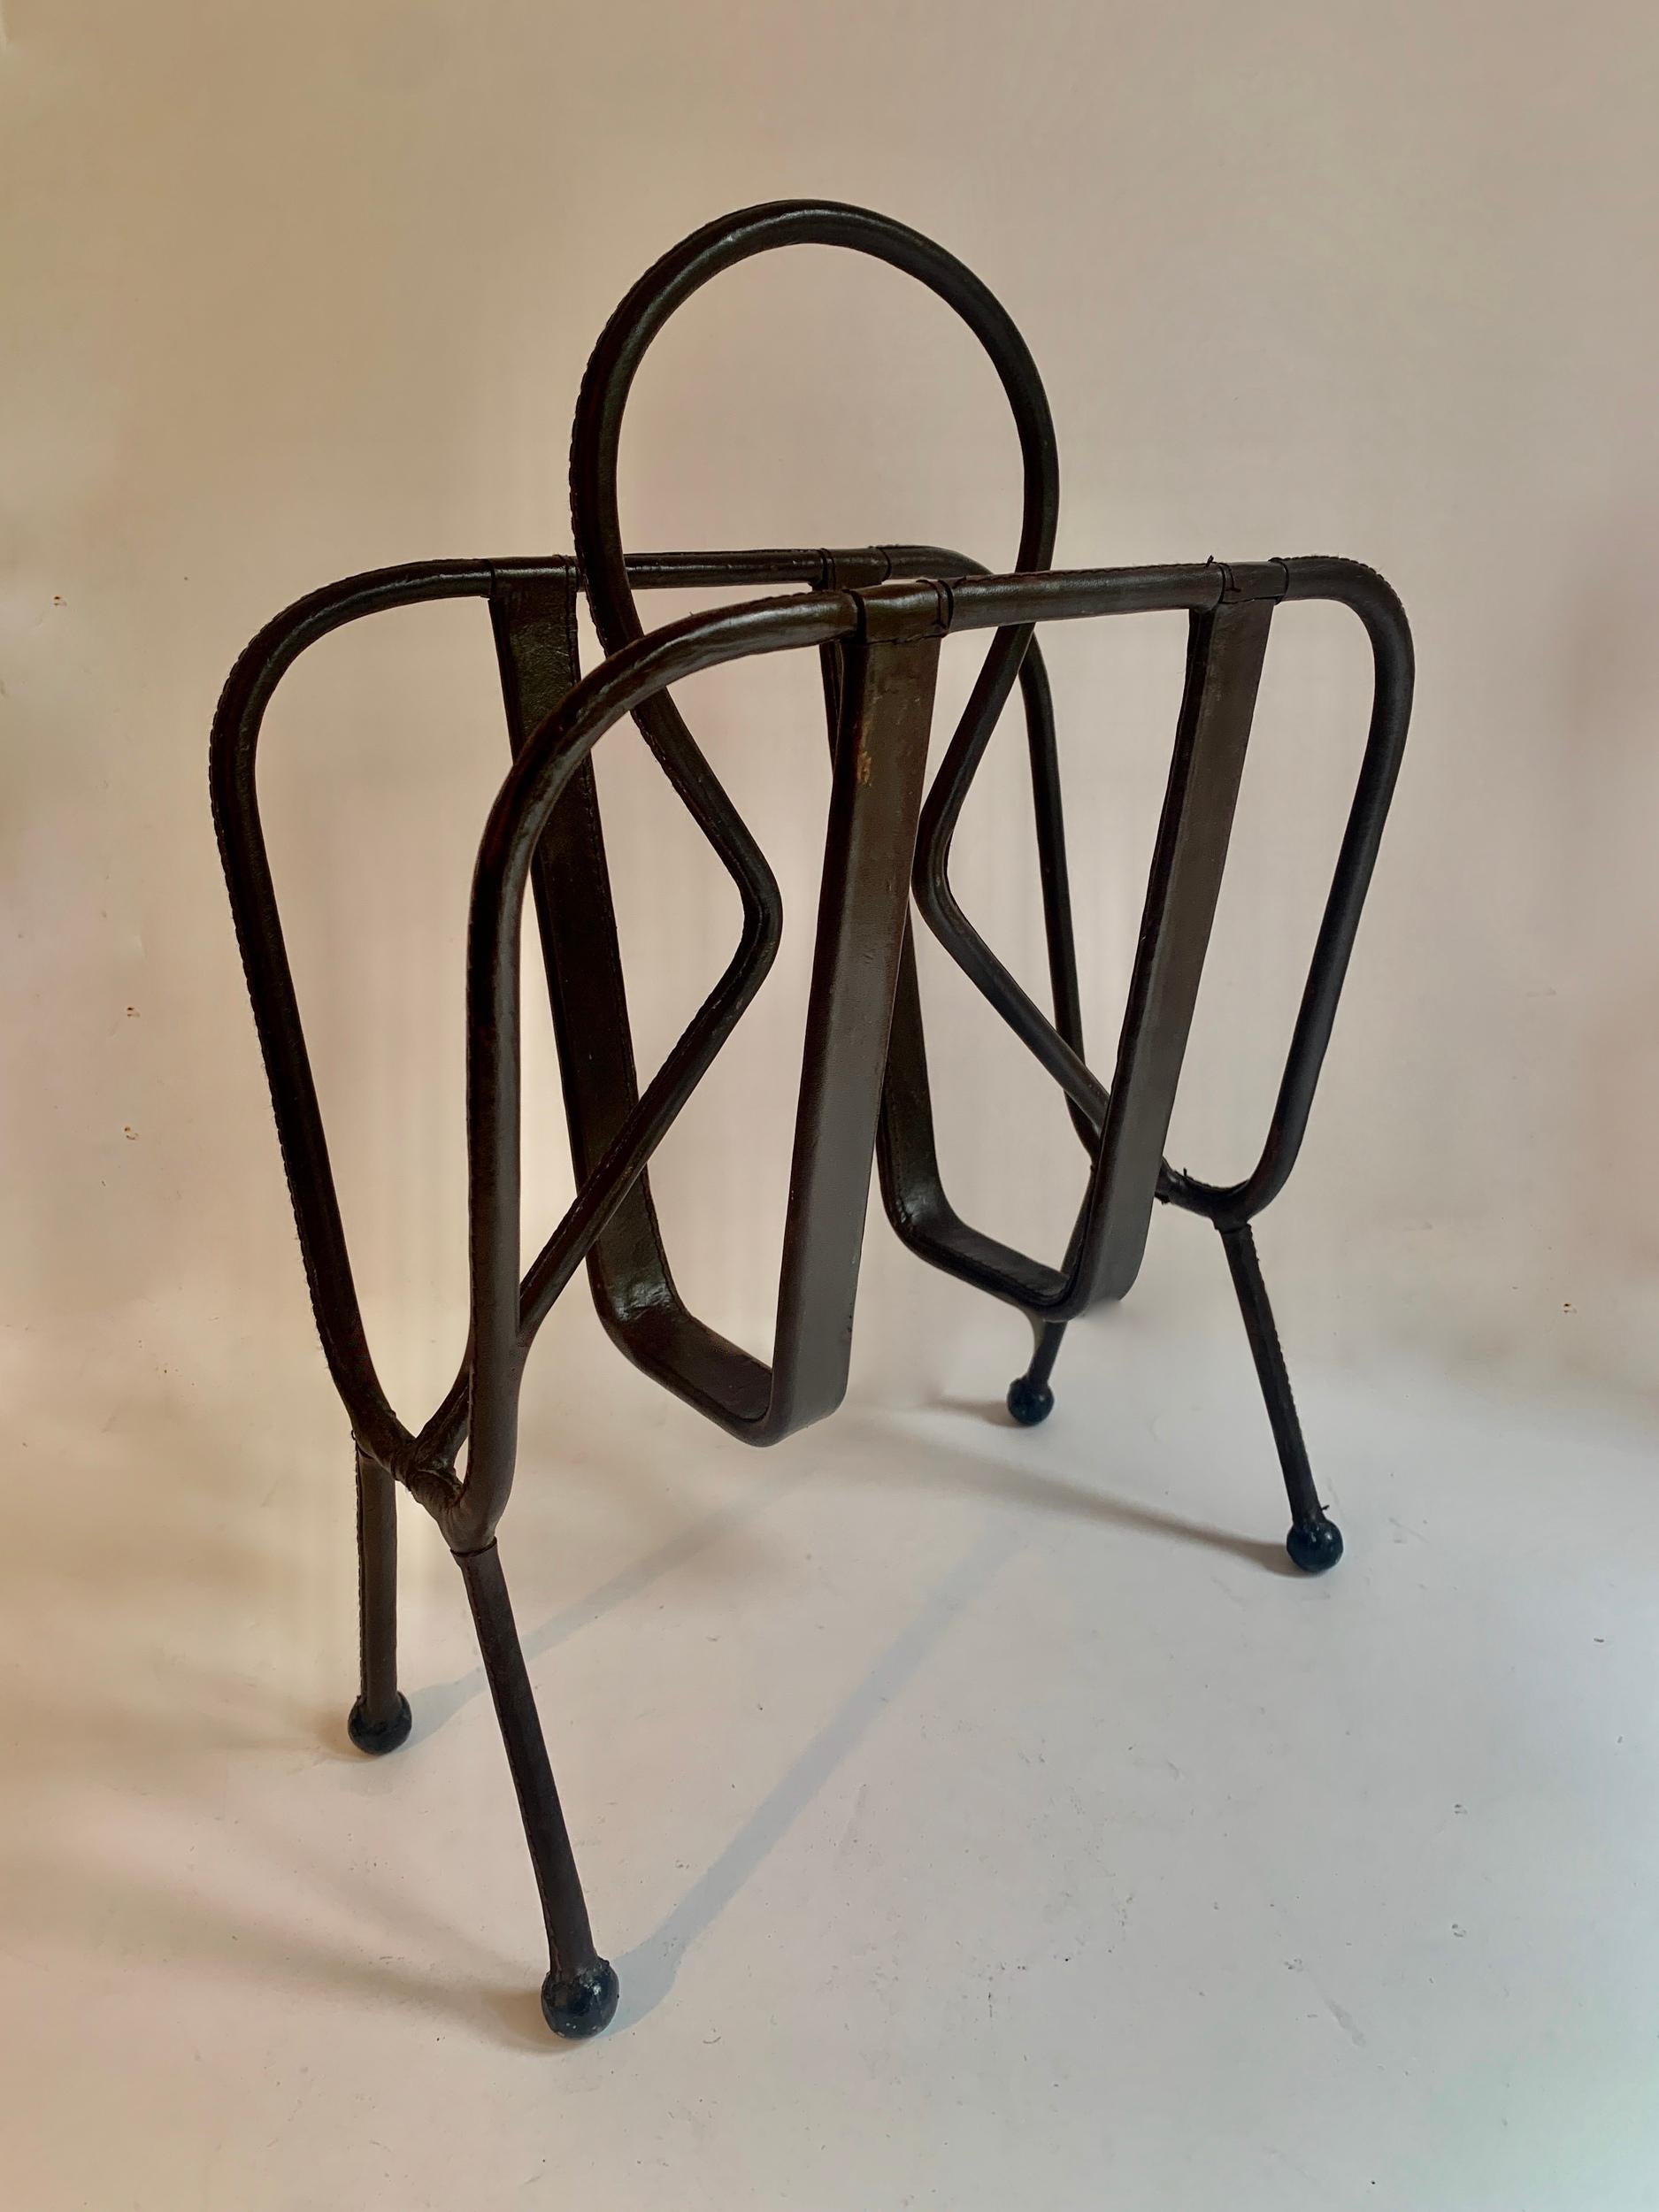 French designer Jacques Adnet is best known for impeccable designs that bring leather, function and design together. 

The magazine rack with iron structure in wonderful condition for the age, is stitched with perfection. The design is